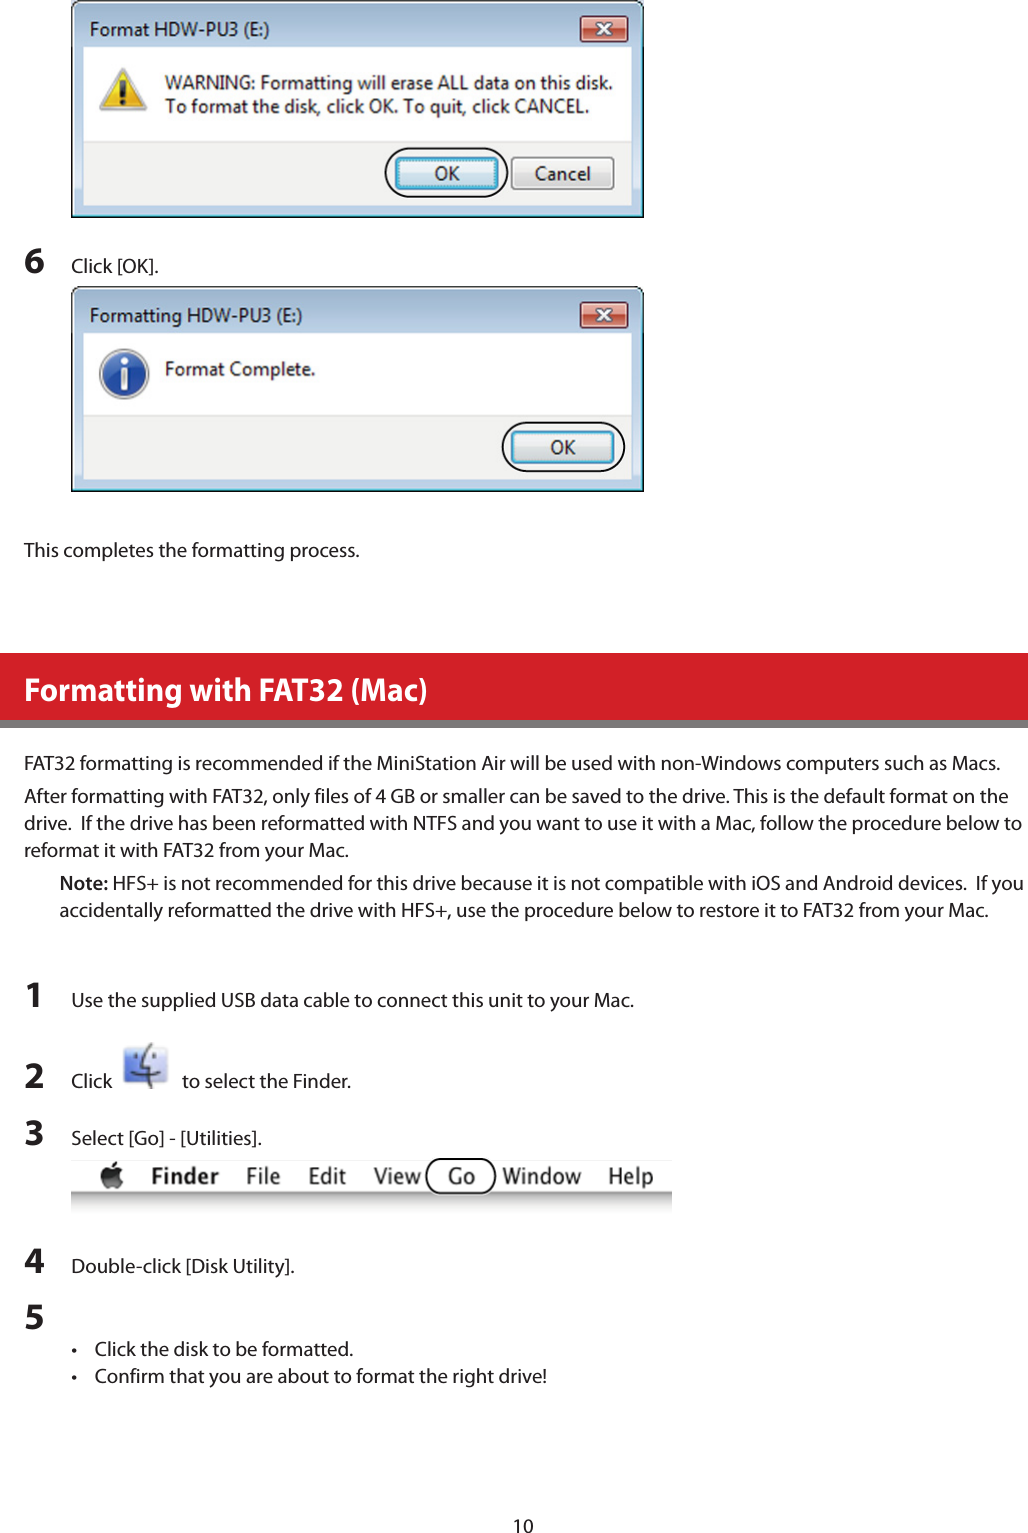 106  Click [OK].This completes the formatting process.Formatting with FAT32 (Mac)FAT32 formatting is recommended if the MiniStation Air will be used with non-Windows computers such as Macs. After formatting with FAT32, only files of 4 GB or smaller can be saved to the drive. This is the default format on the drive.  If the drive has been reformatted with NTFS and you want to use it with a Mac, follow the procedure below to reformat it with FAT32 from your Mac.  Note: HFS+ is not recommended for this drive because it is not compatible with iOS and Android devices.  If you accidentally reformatted the drive with HFS+, use the procedure below to restore it to FAT32 from your Mac.1  Use the supplied USB data cable to connect this unit to your Mac.2  Click     to select the Finder.3  Select [Go] - [Utilities].4  Double-click [Disk Utility].5 •  Click the disk to be formatted.•  Confirm that you are about to format the right drive!